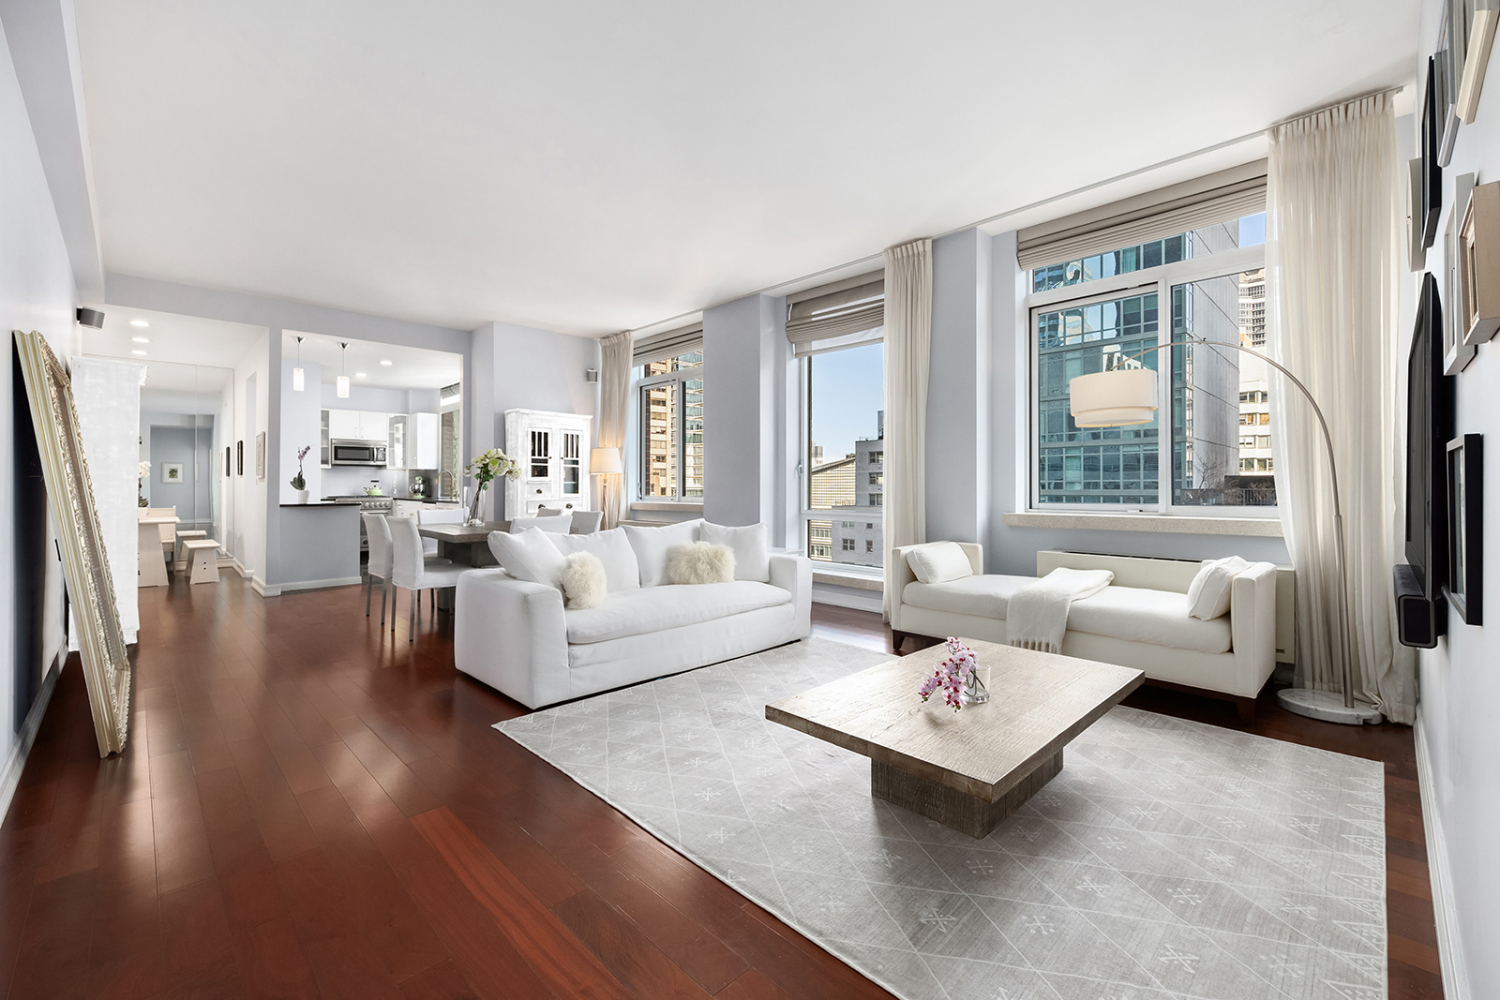 212 East 57th Street 16A, Sutton, Midtown East, NYC - 3 Bedrooms  
3.5 Bathrooms  
6 Rooms - 